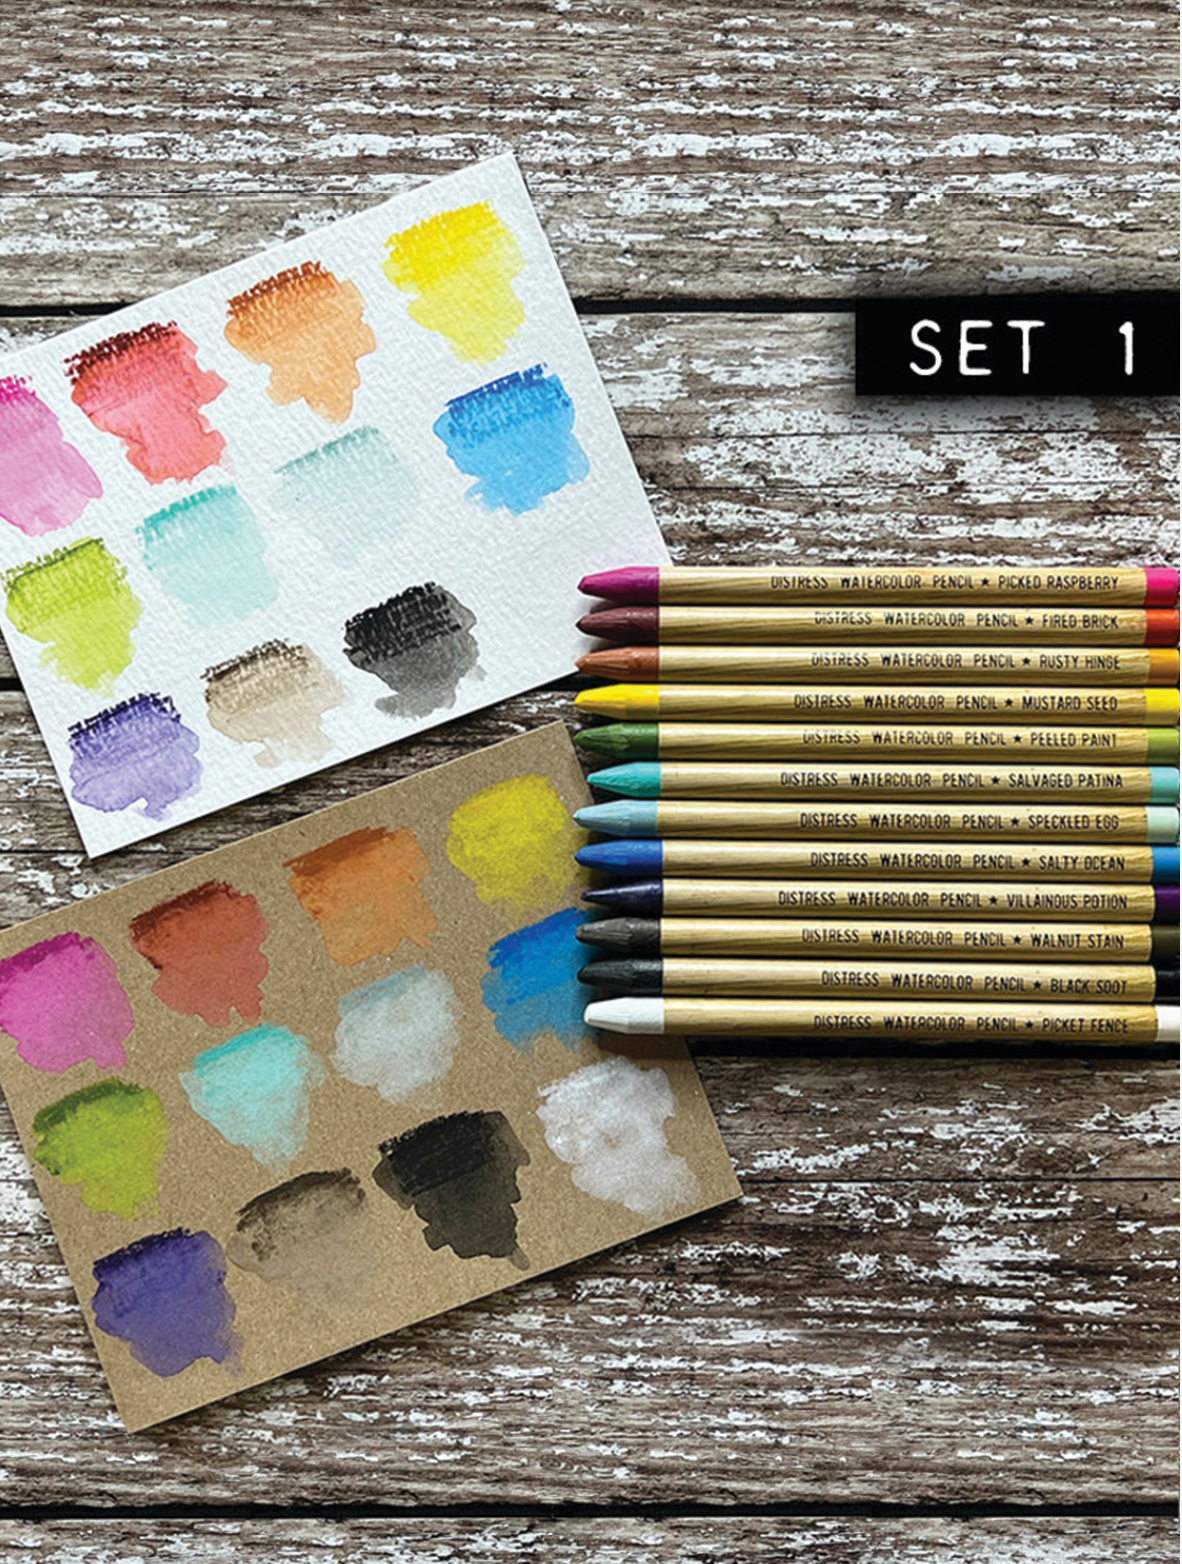 Watercolor Pencils by Stampin' Up!